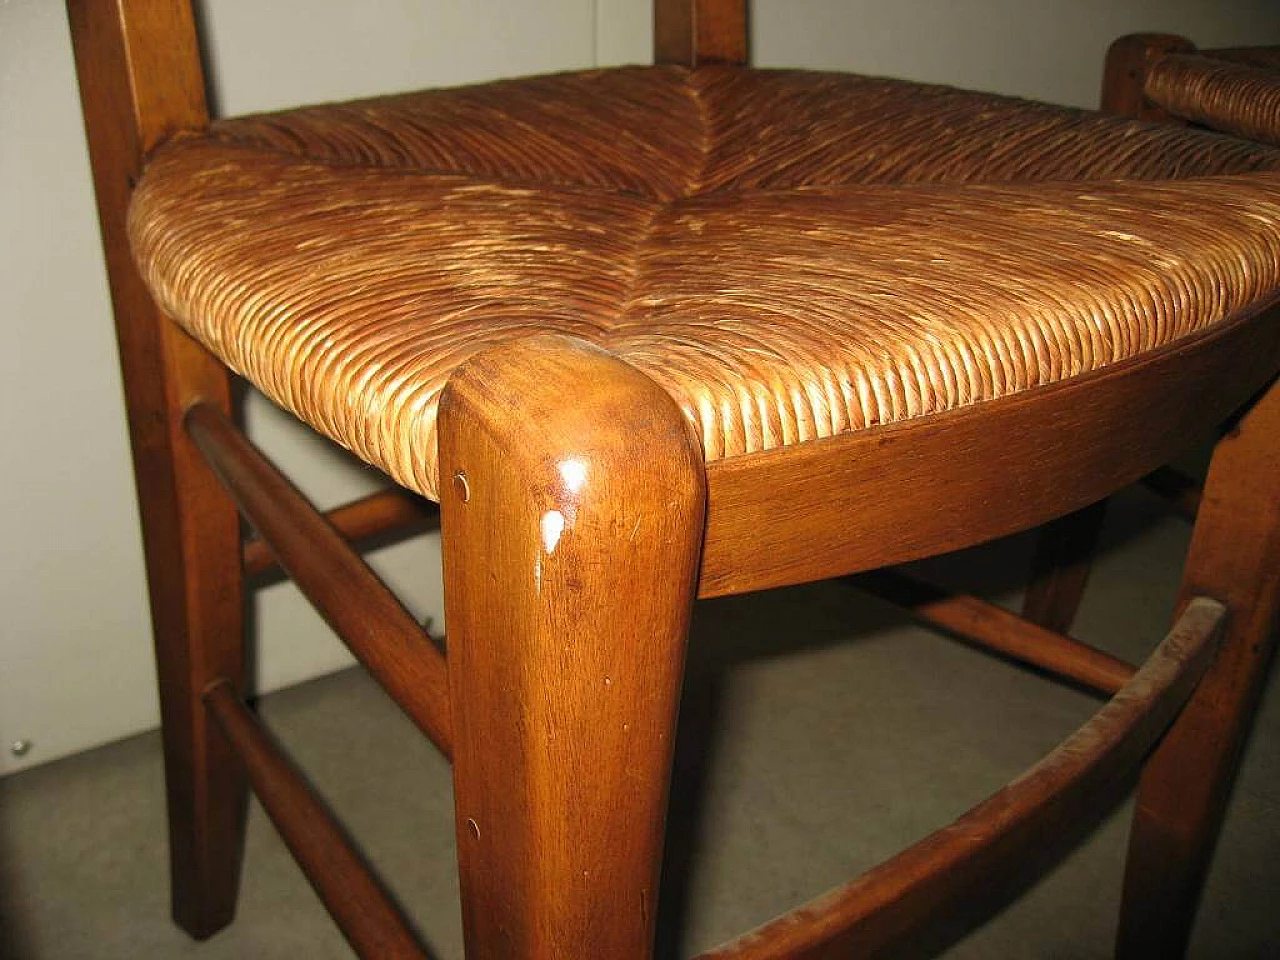 4 Walnut chairs with straw seat, early 2000s 1253817